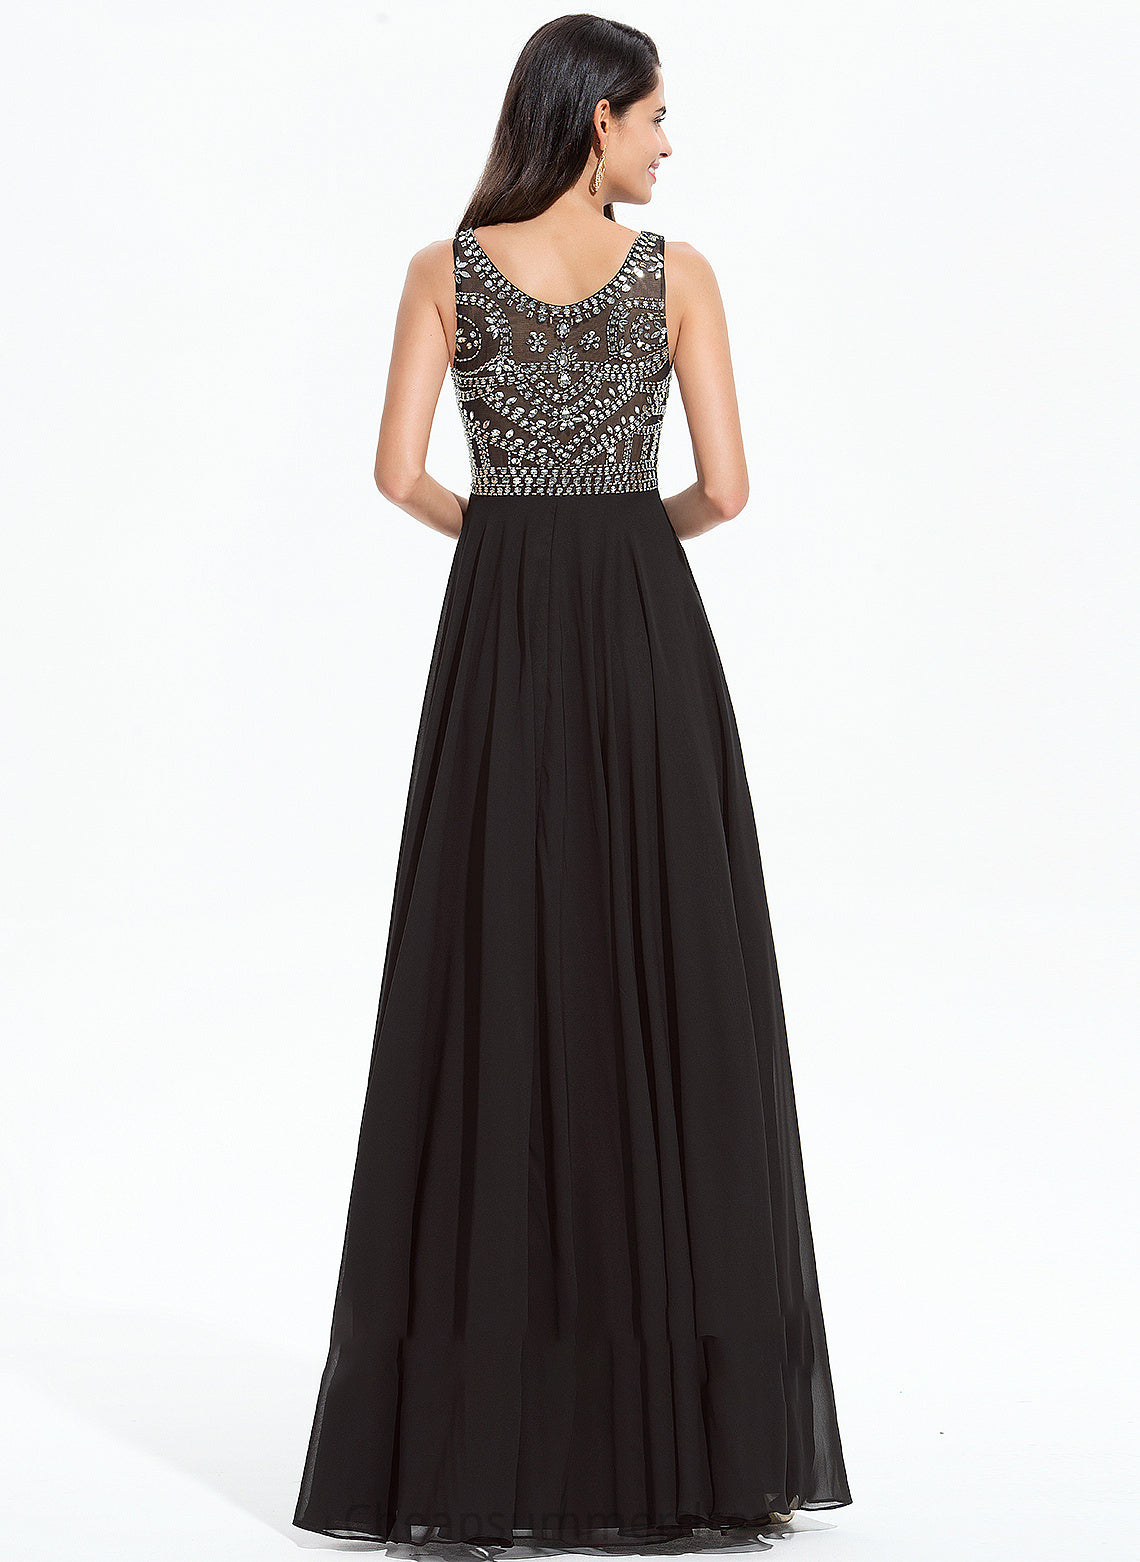 Beading Sequins Neck With Kenley Prom Dresses A-Line Floor-Length Scoop Chiffon